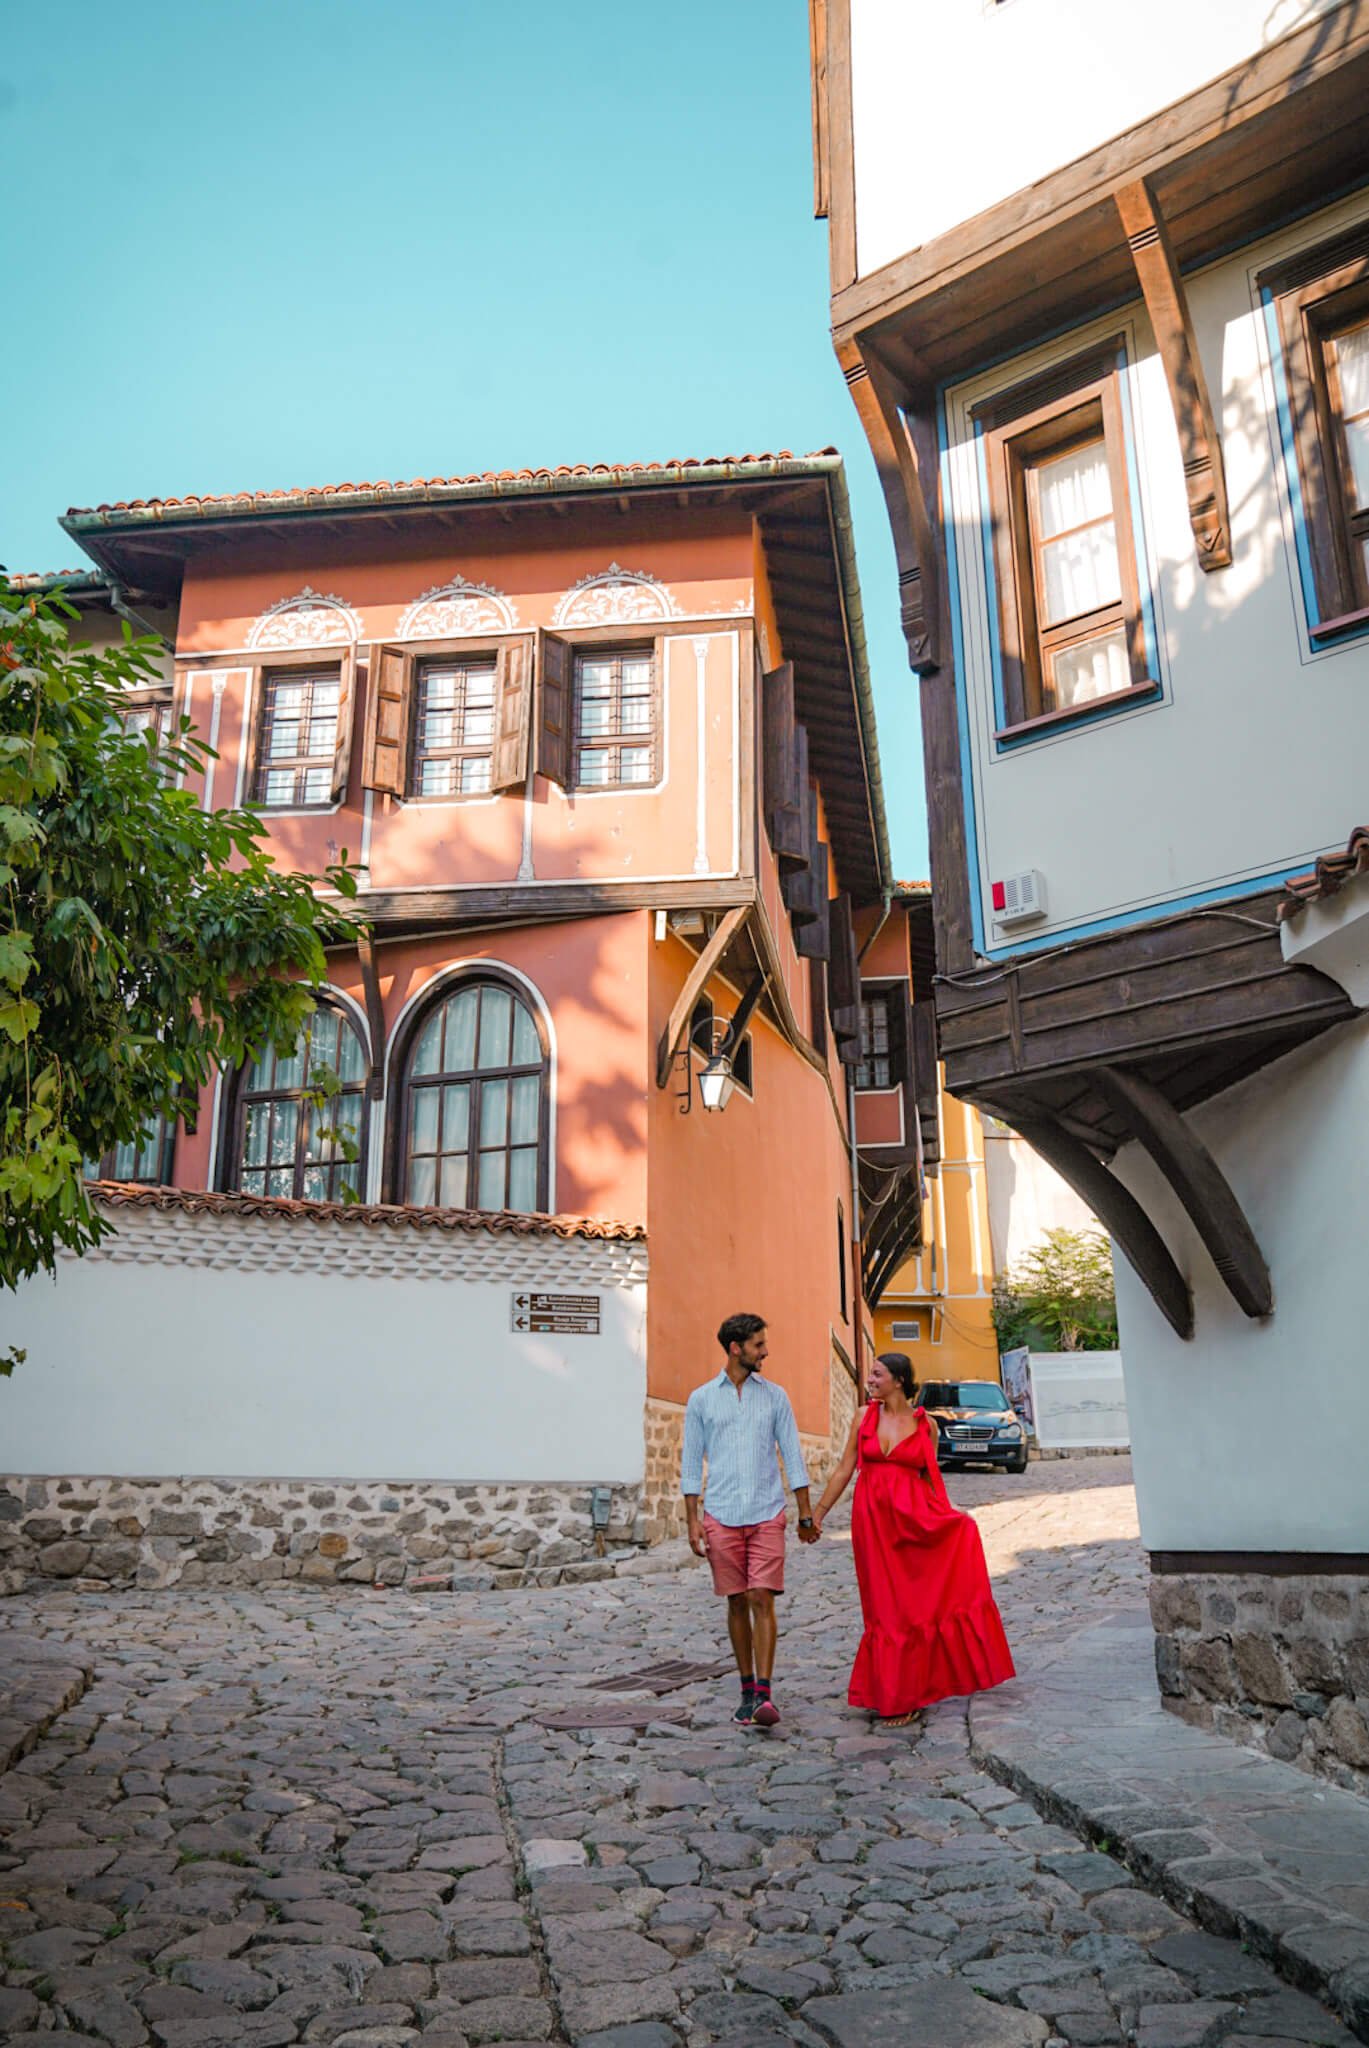 Plovdiv, the best places to visit in Bulgaria